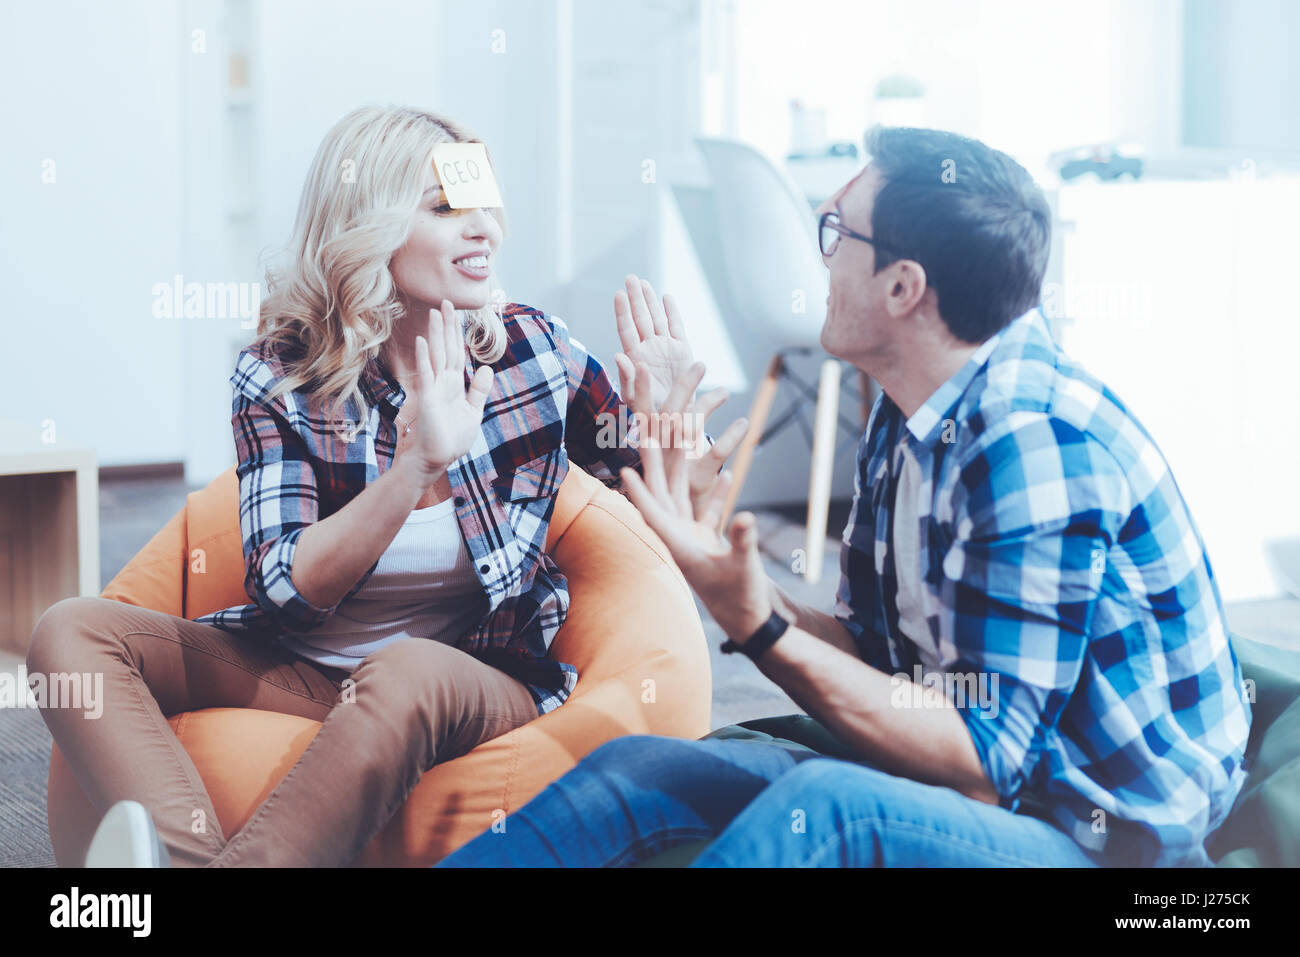 Cheerful delighted friends resting together Stock Photo